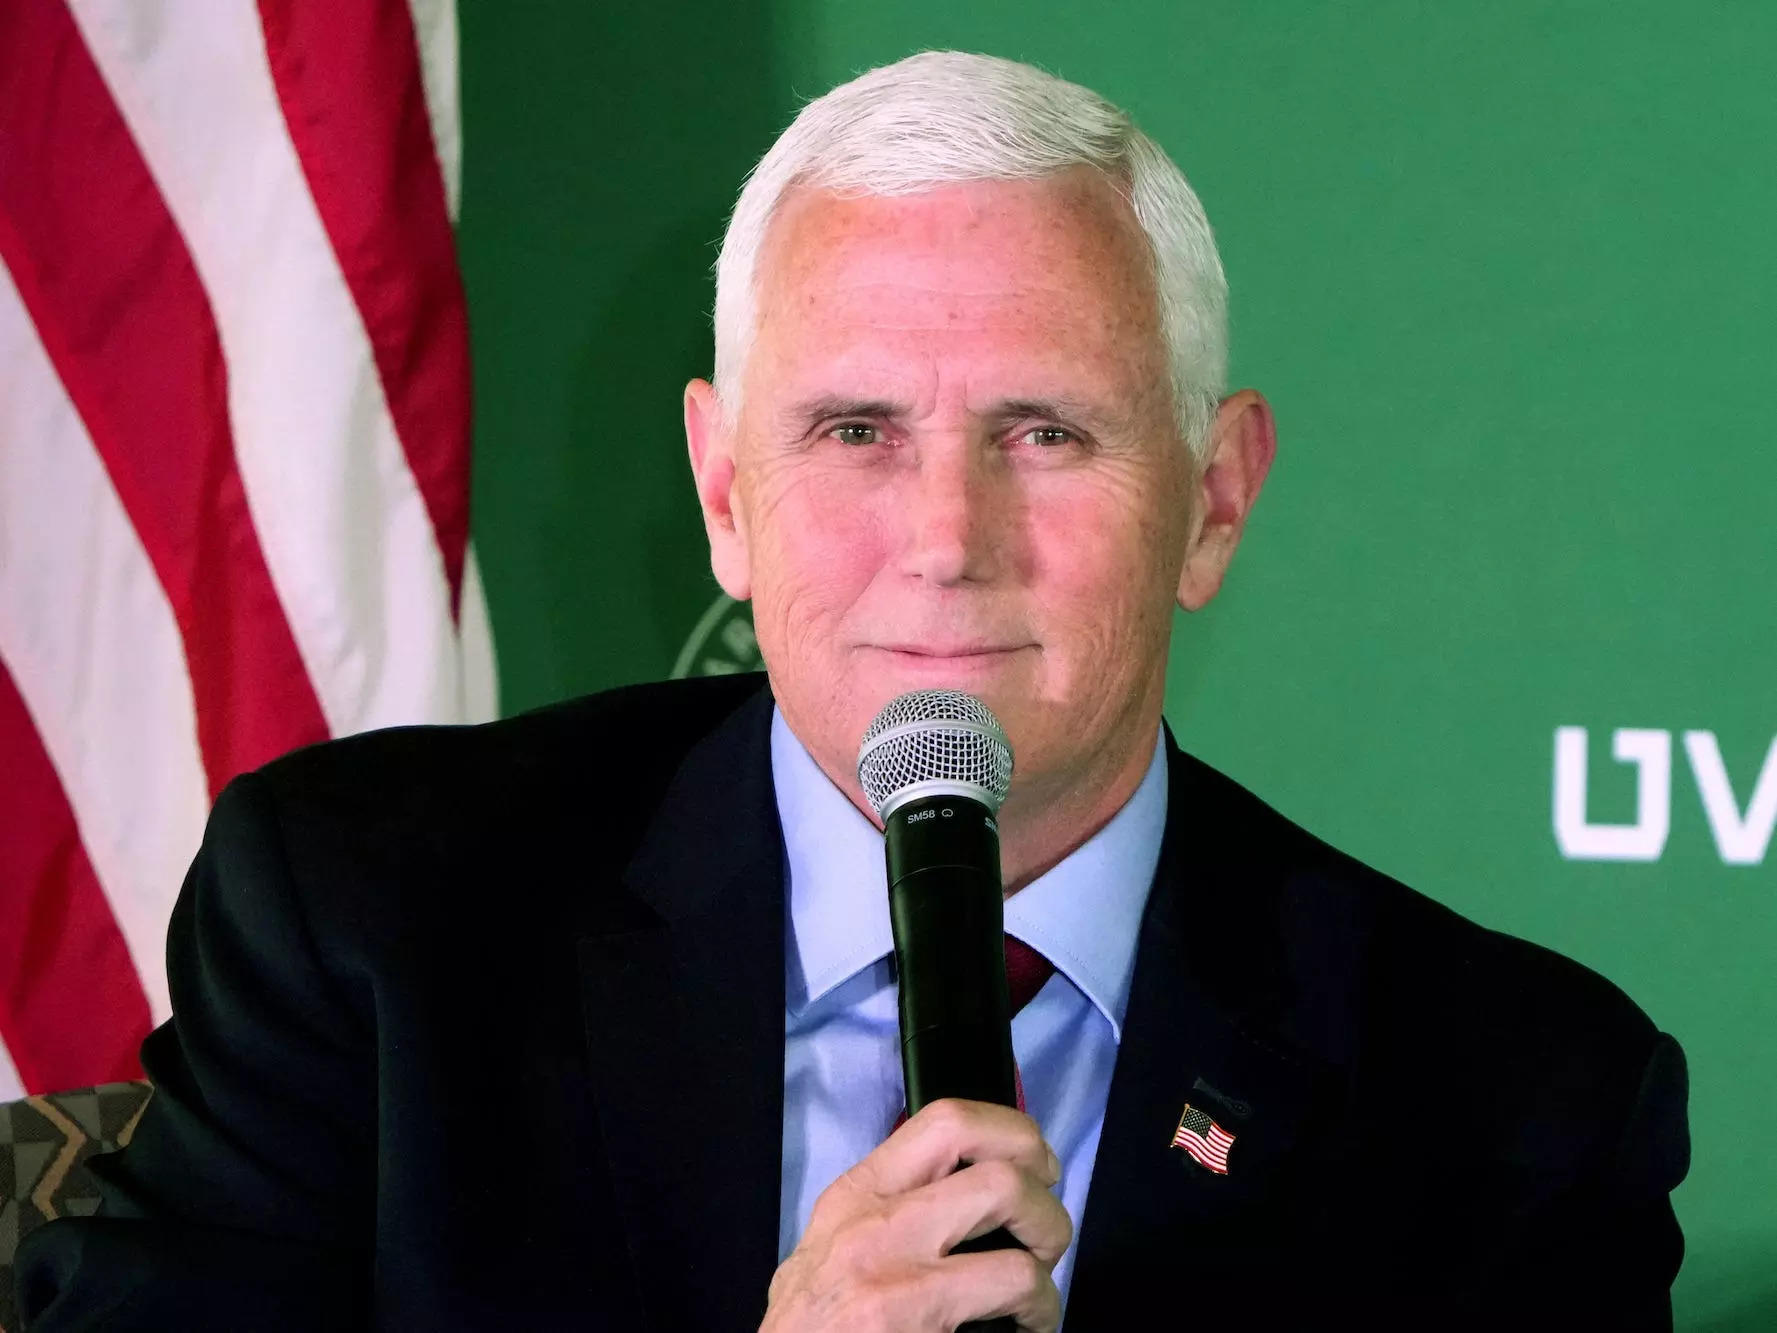 Mike Pence just officially filed to run for president in 2024